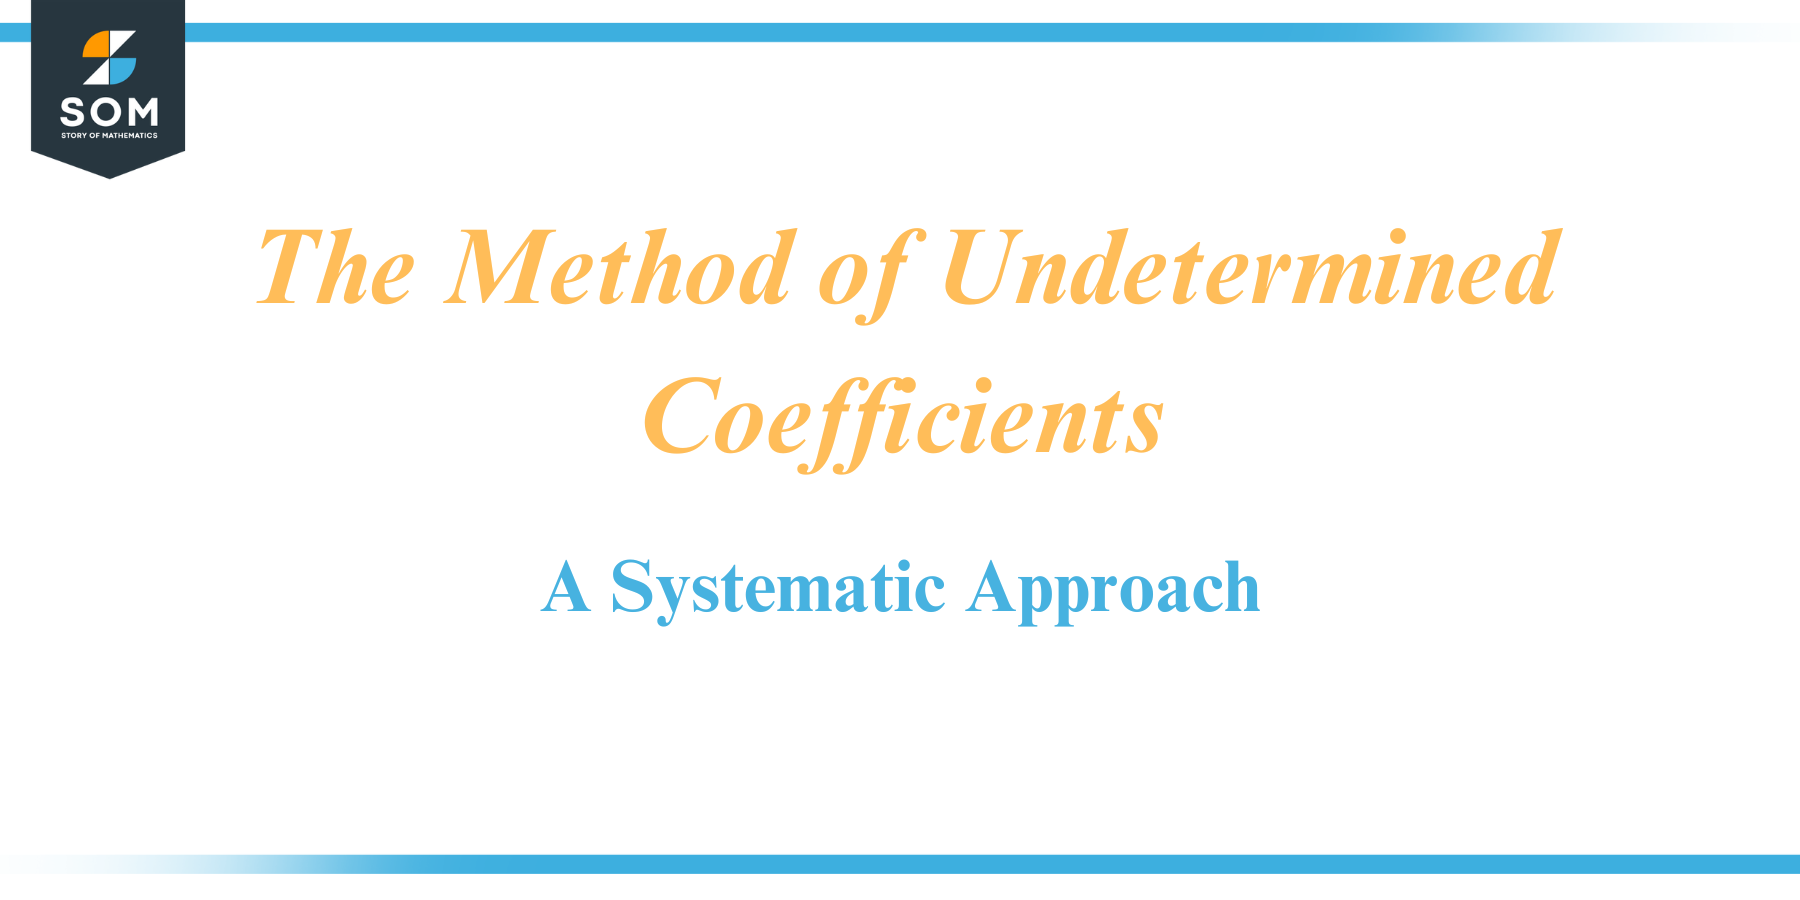 The Method of Undetermined Coefficients A Systematic Approach